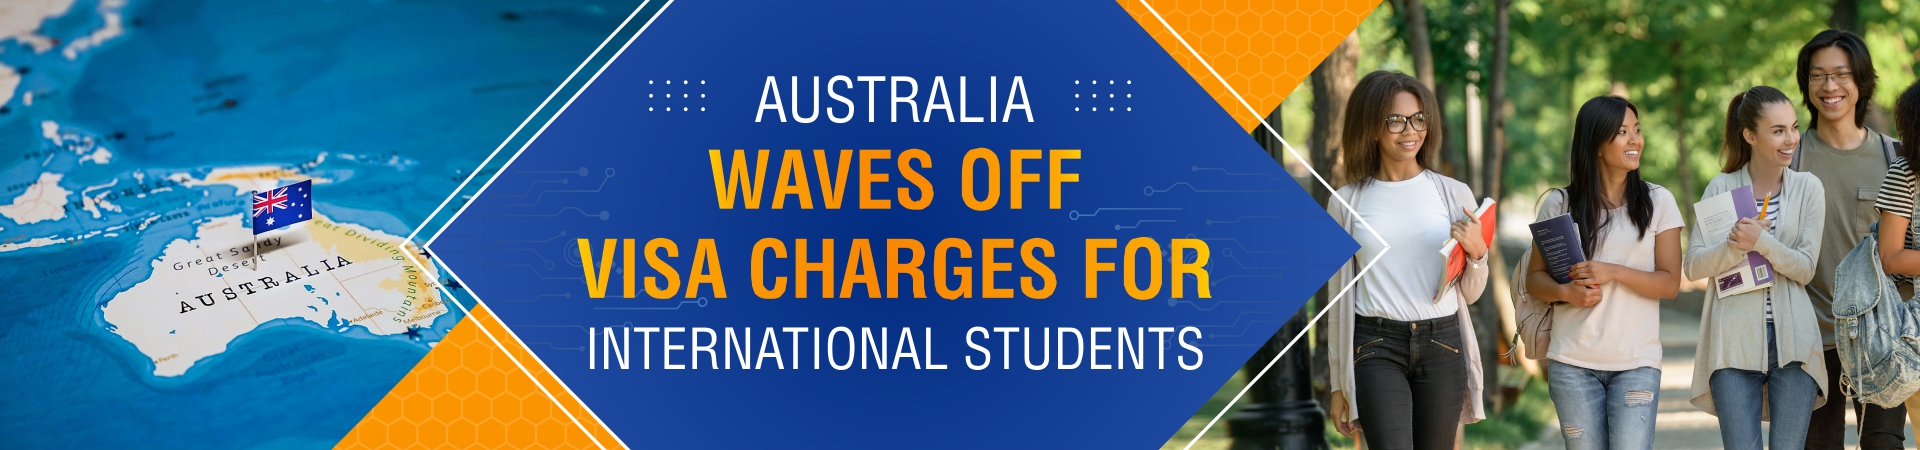 Australia waves off visa charges for international students